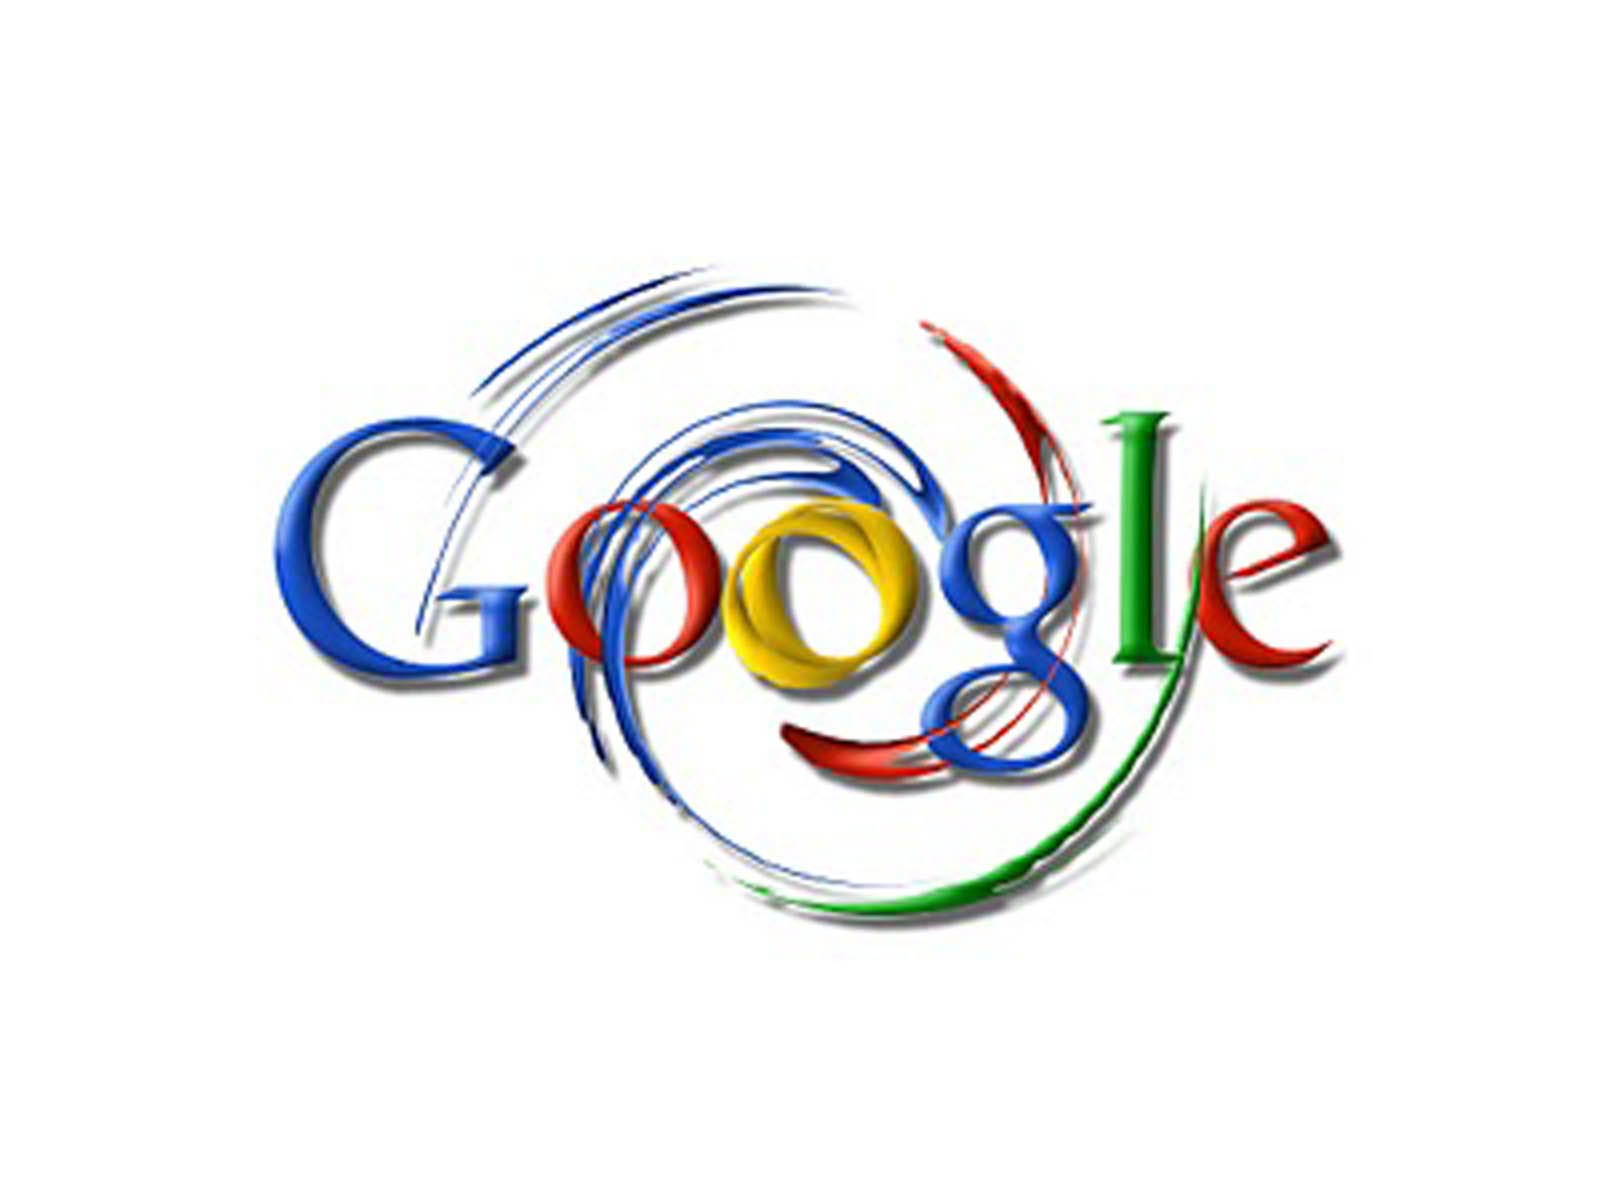 Google Desktop Wallpaper Image Photos Pictures And Background